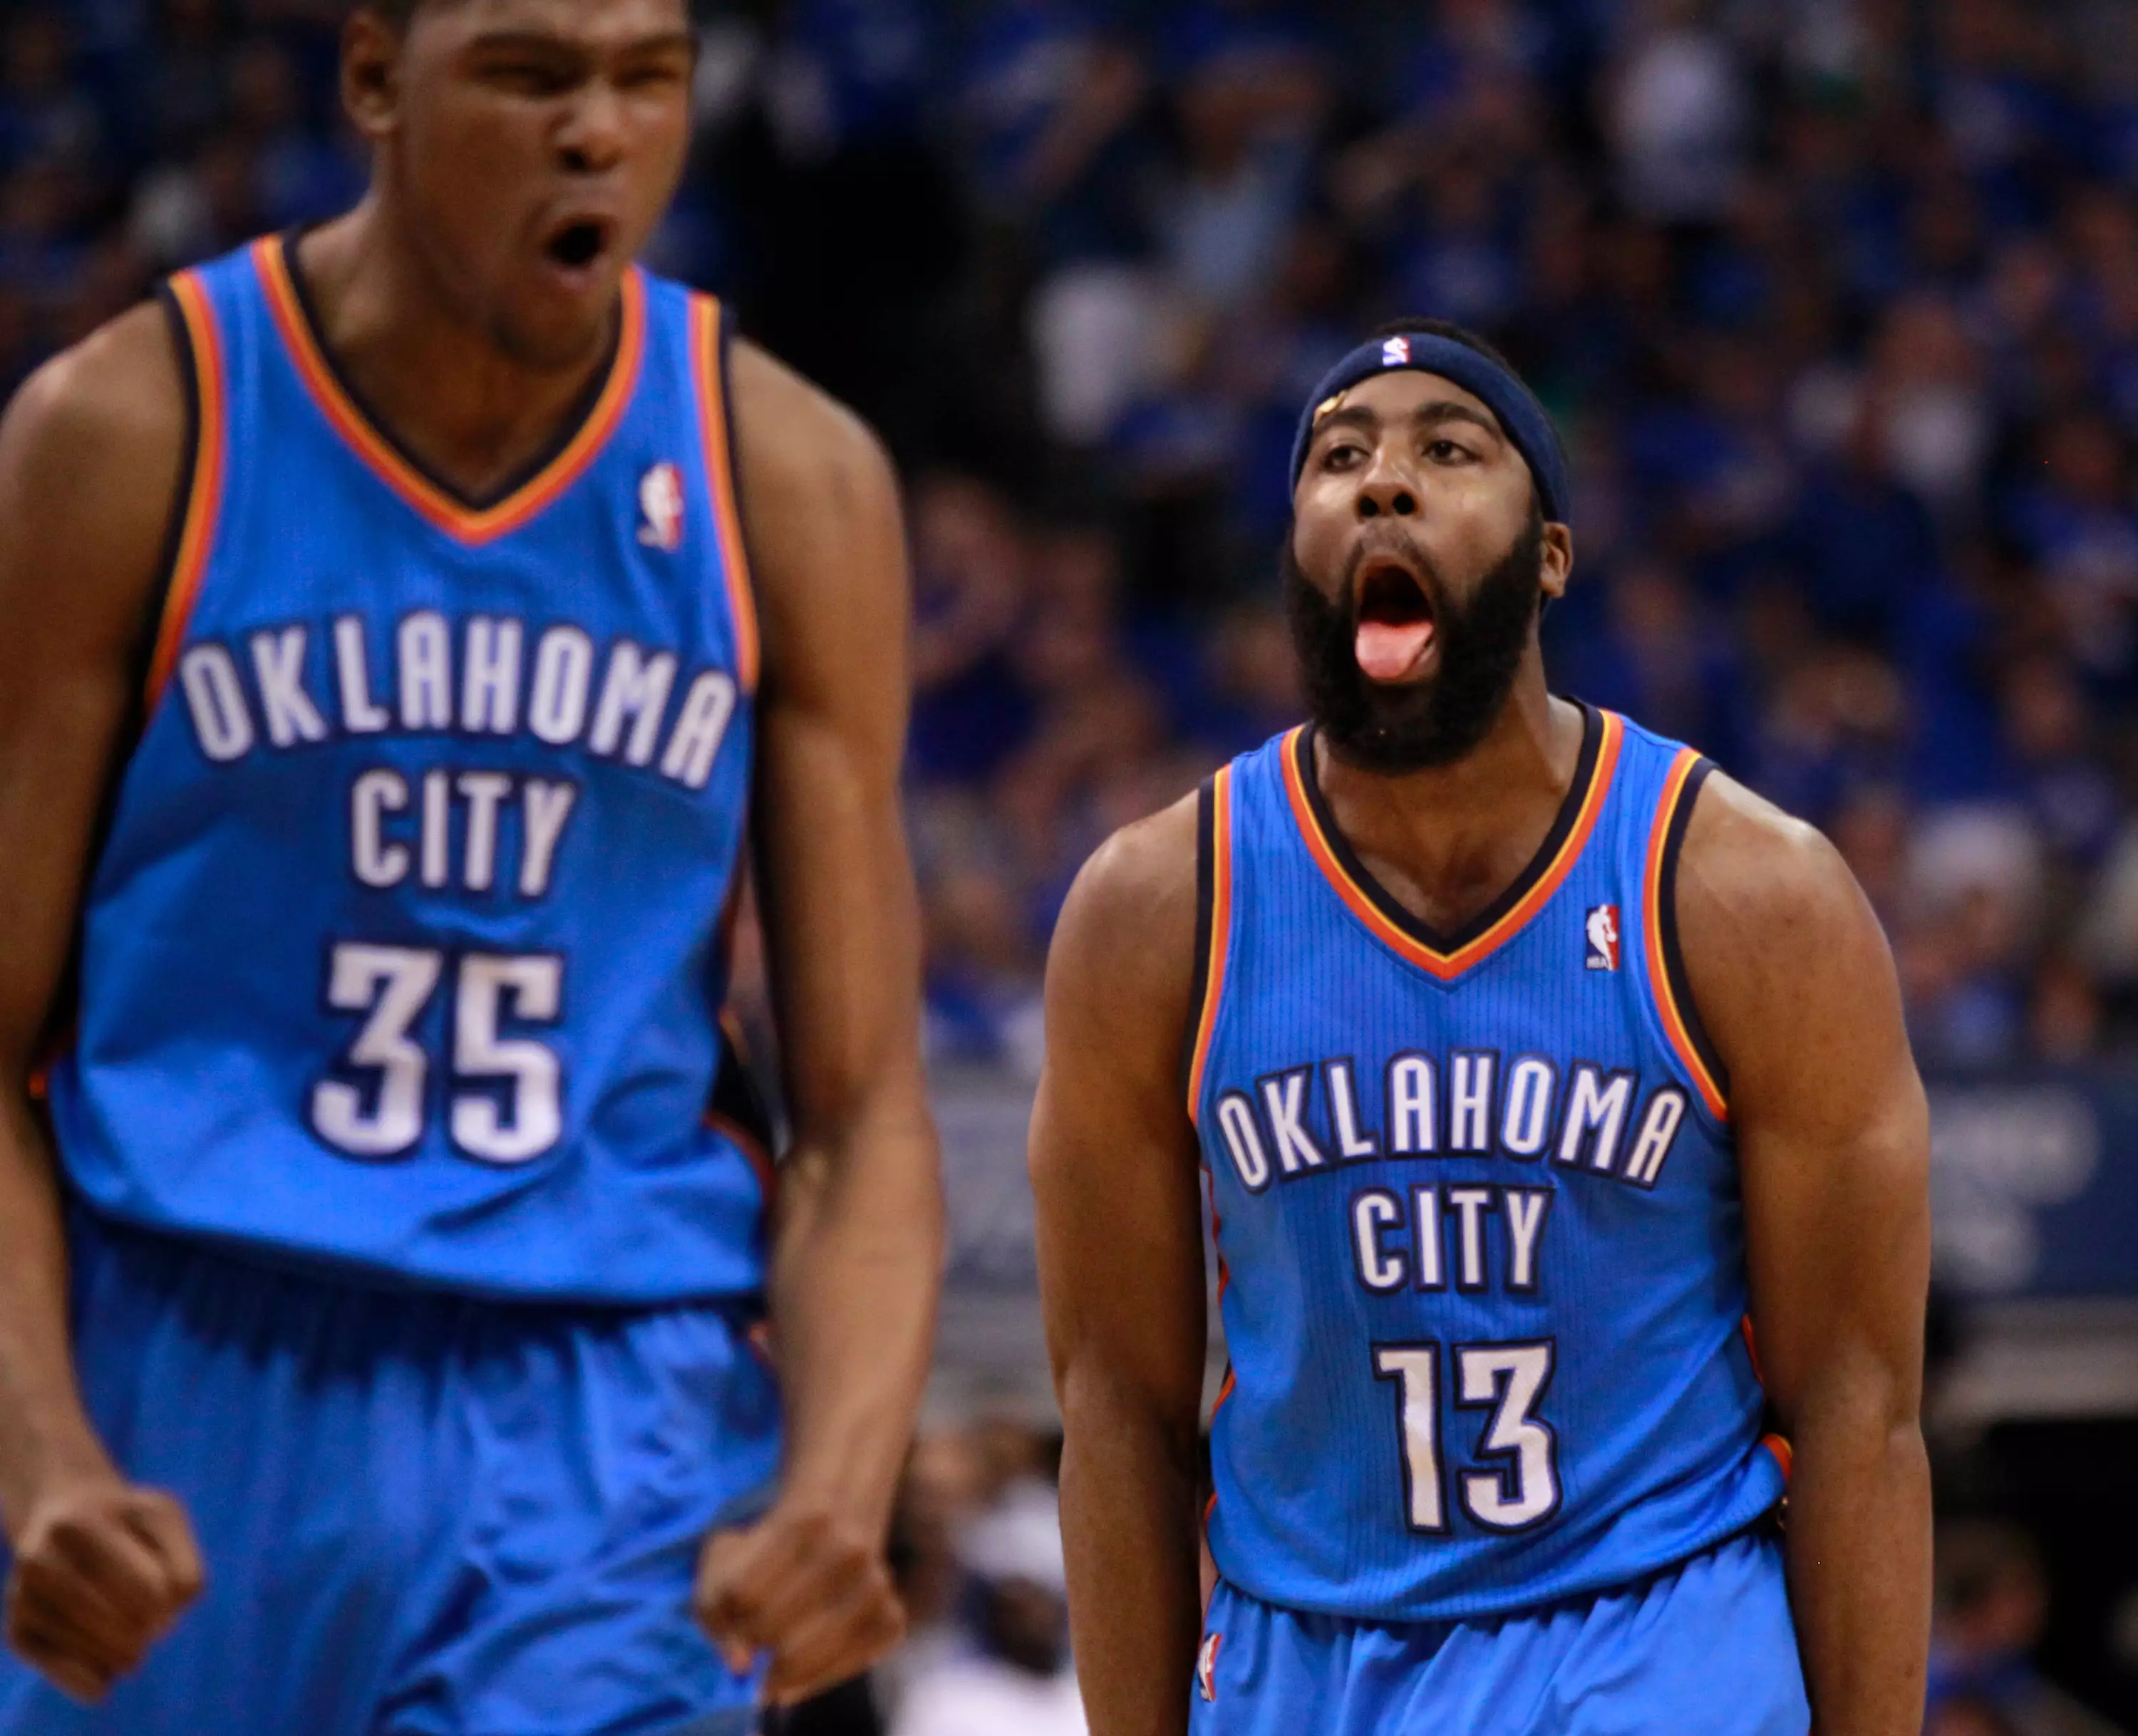 Harden and Durant played together in OKC.